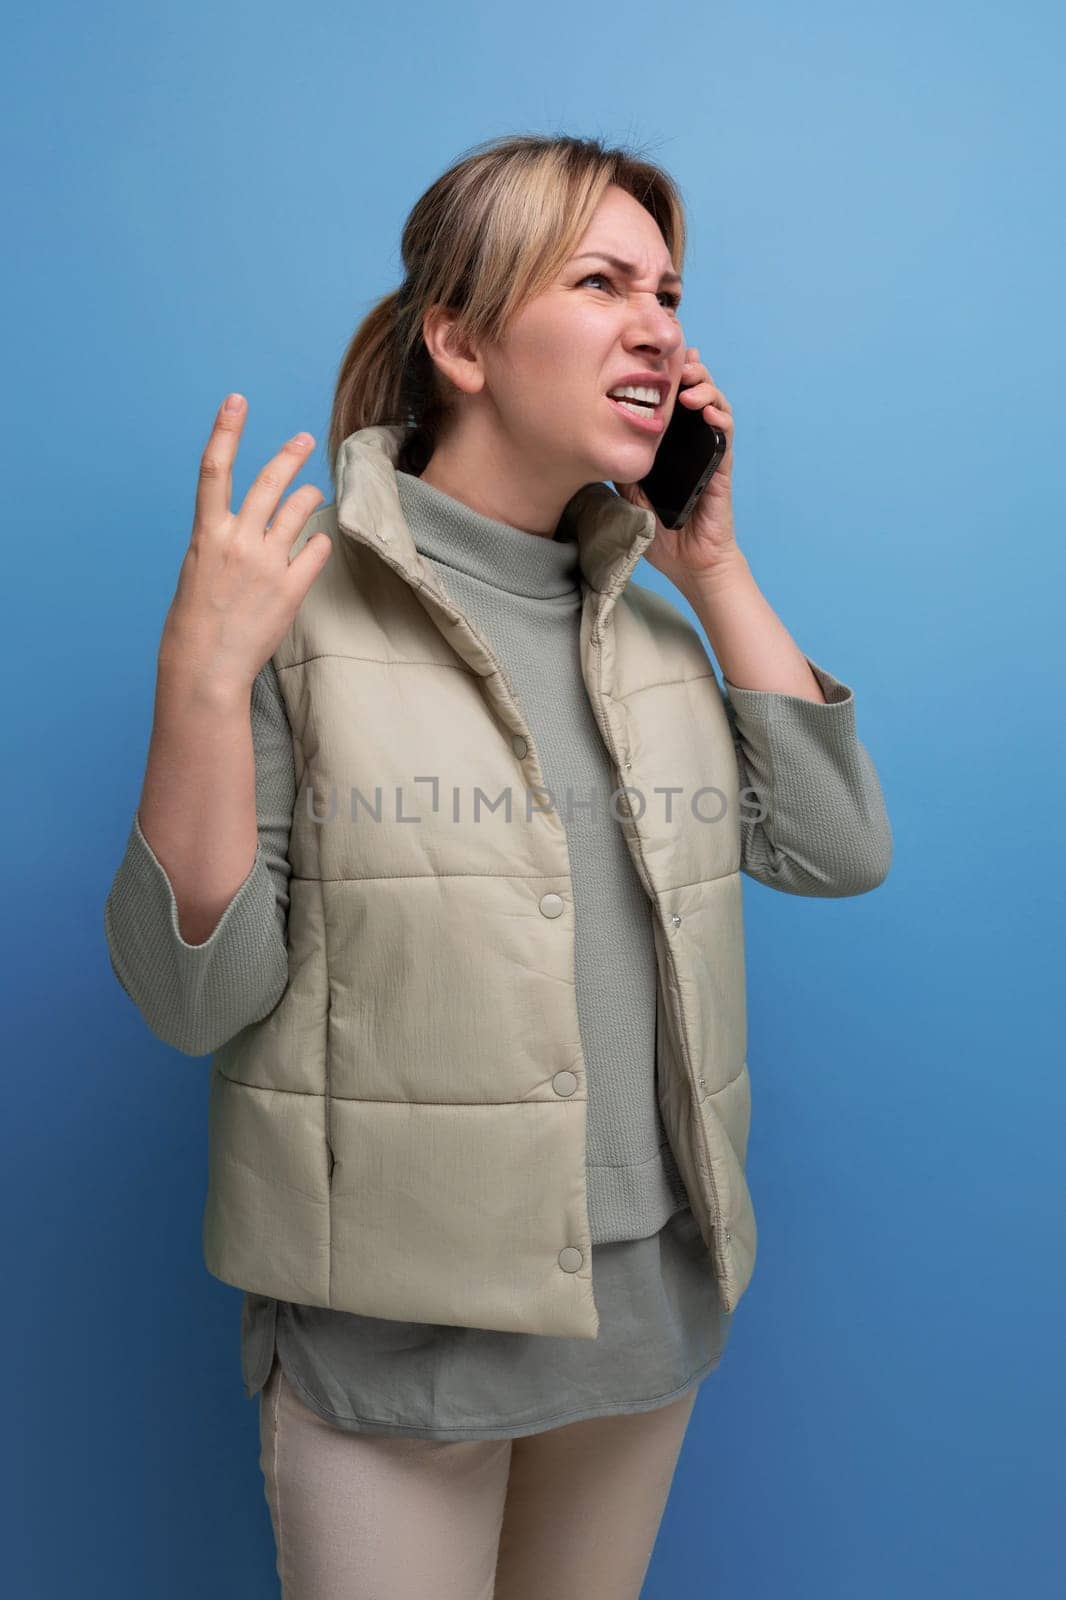 blond millennial woman talking on the phone on a blue isolated background.